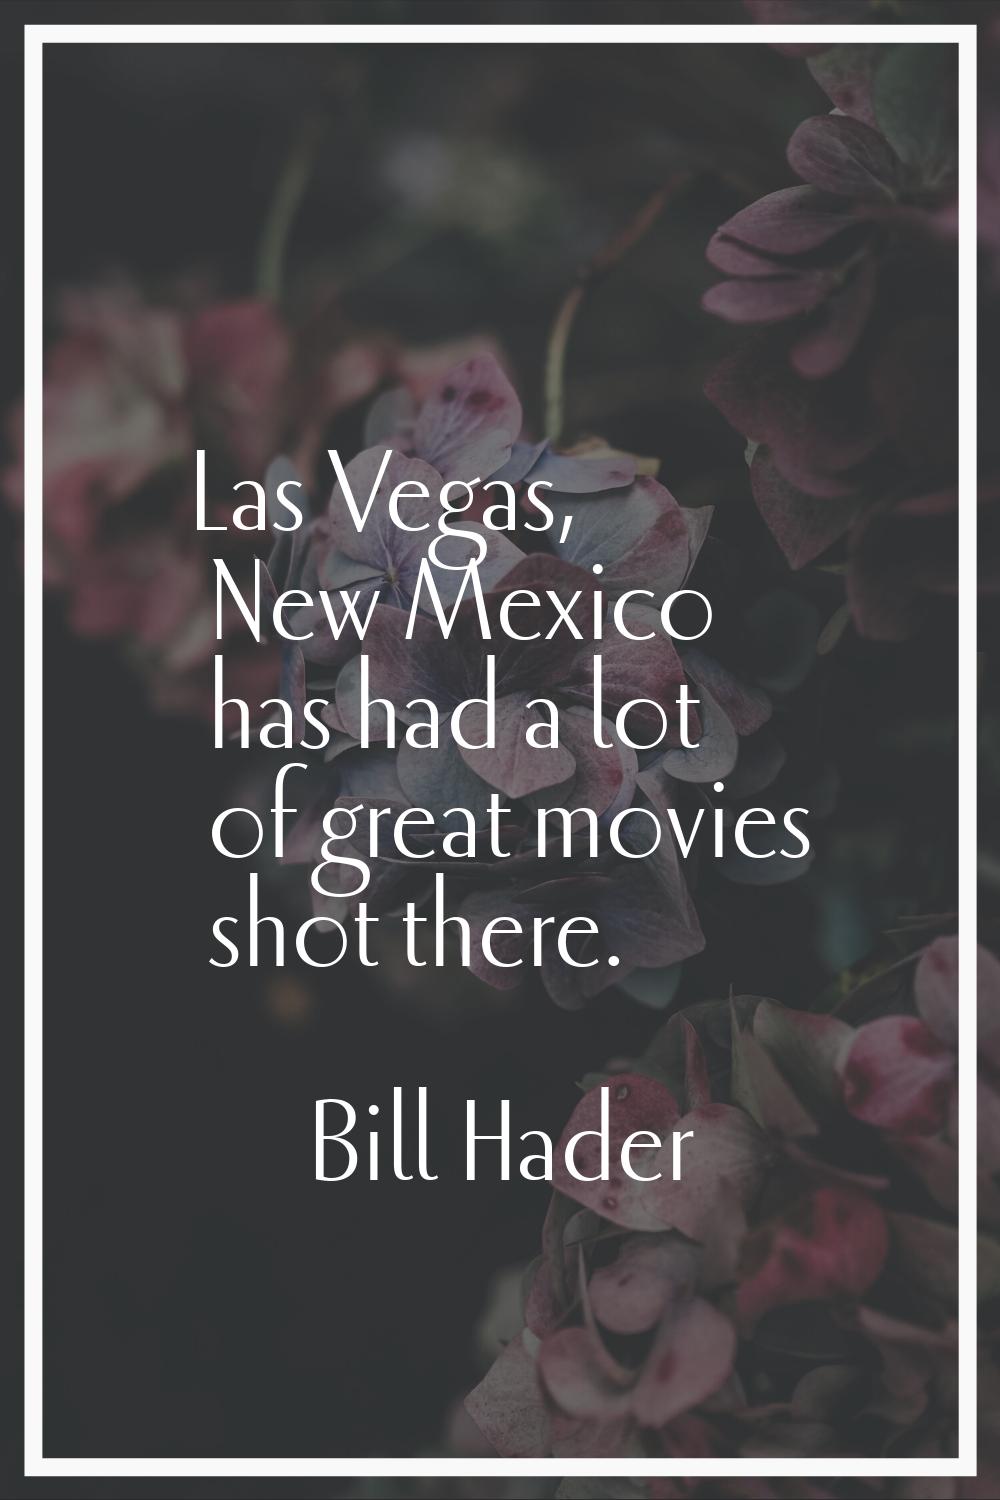 Las Vegas, New Mexico has had a lot of great movies shot there.